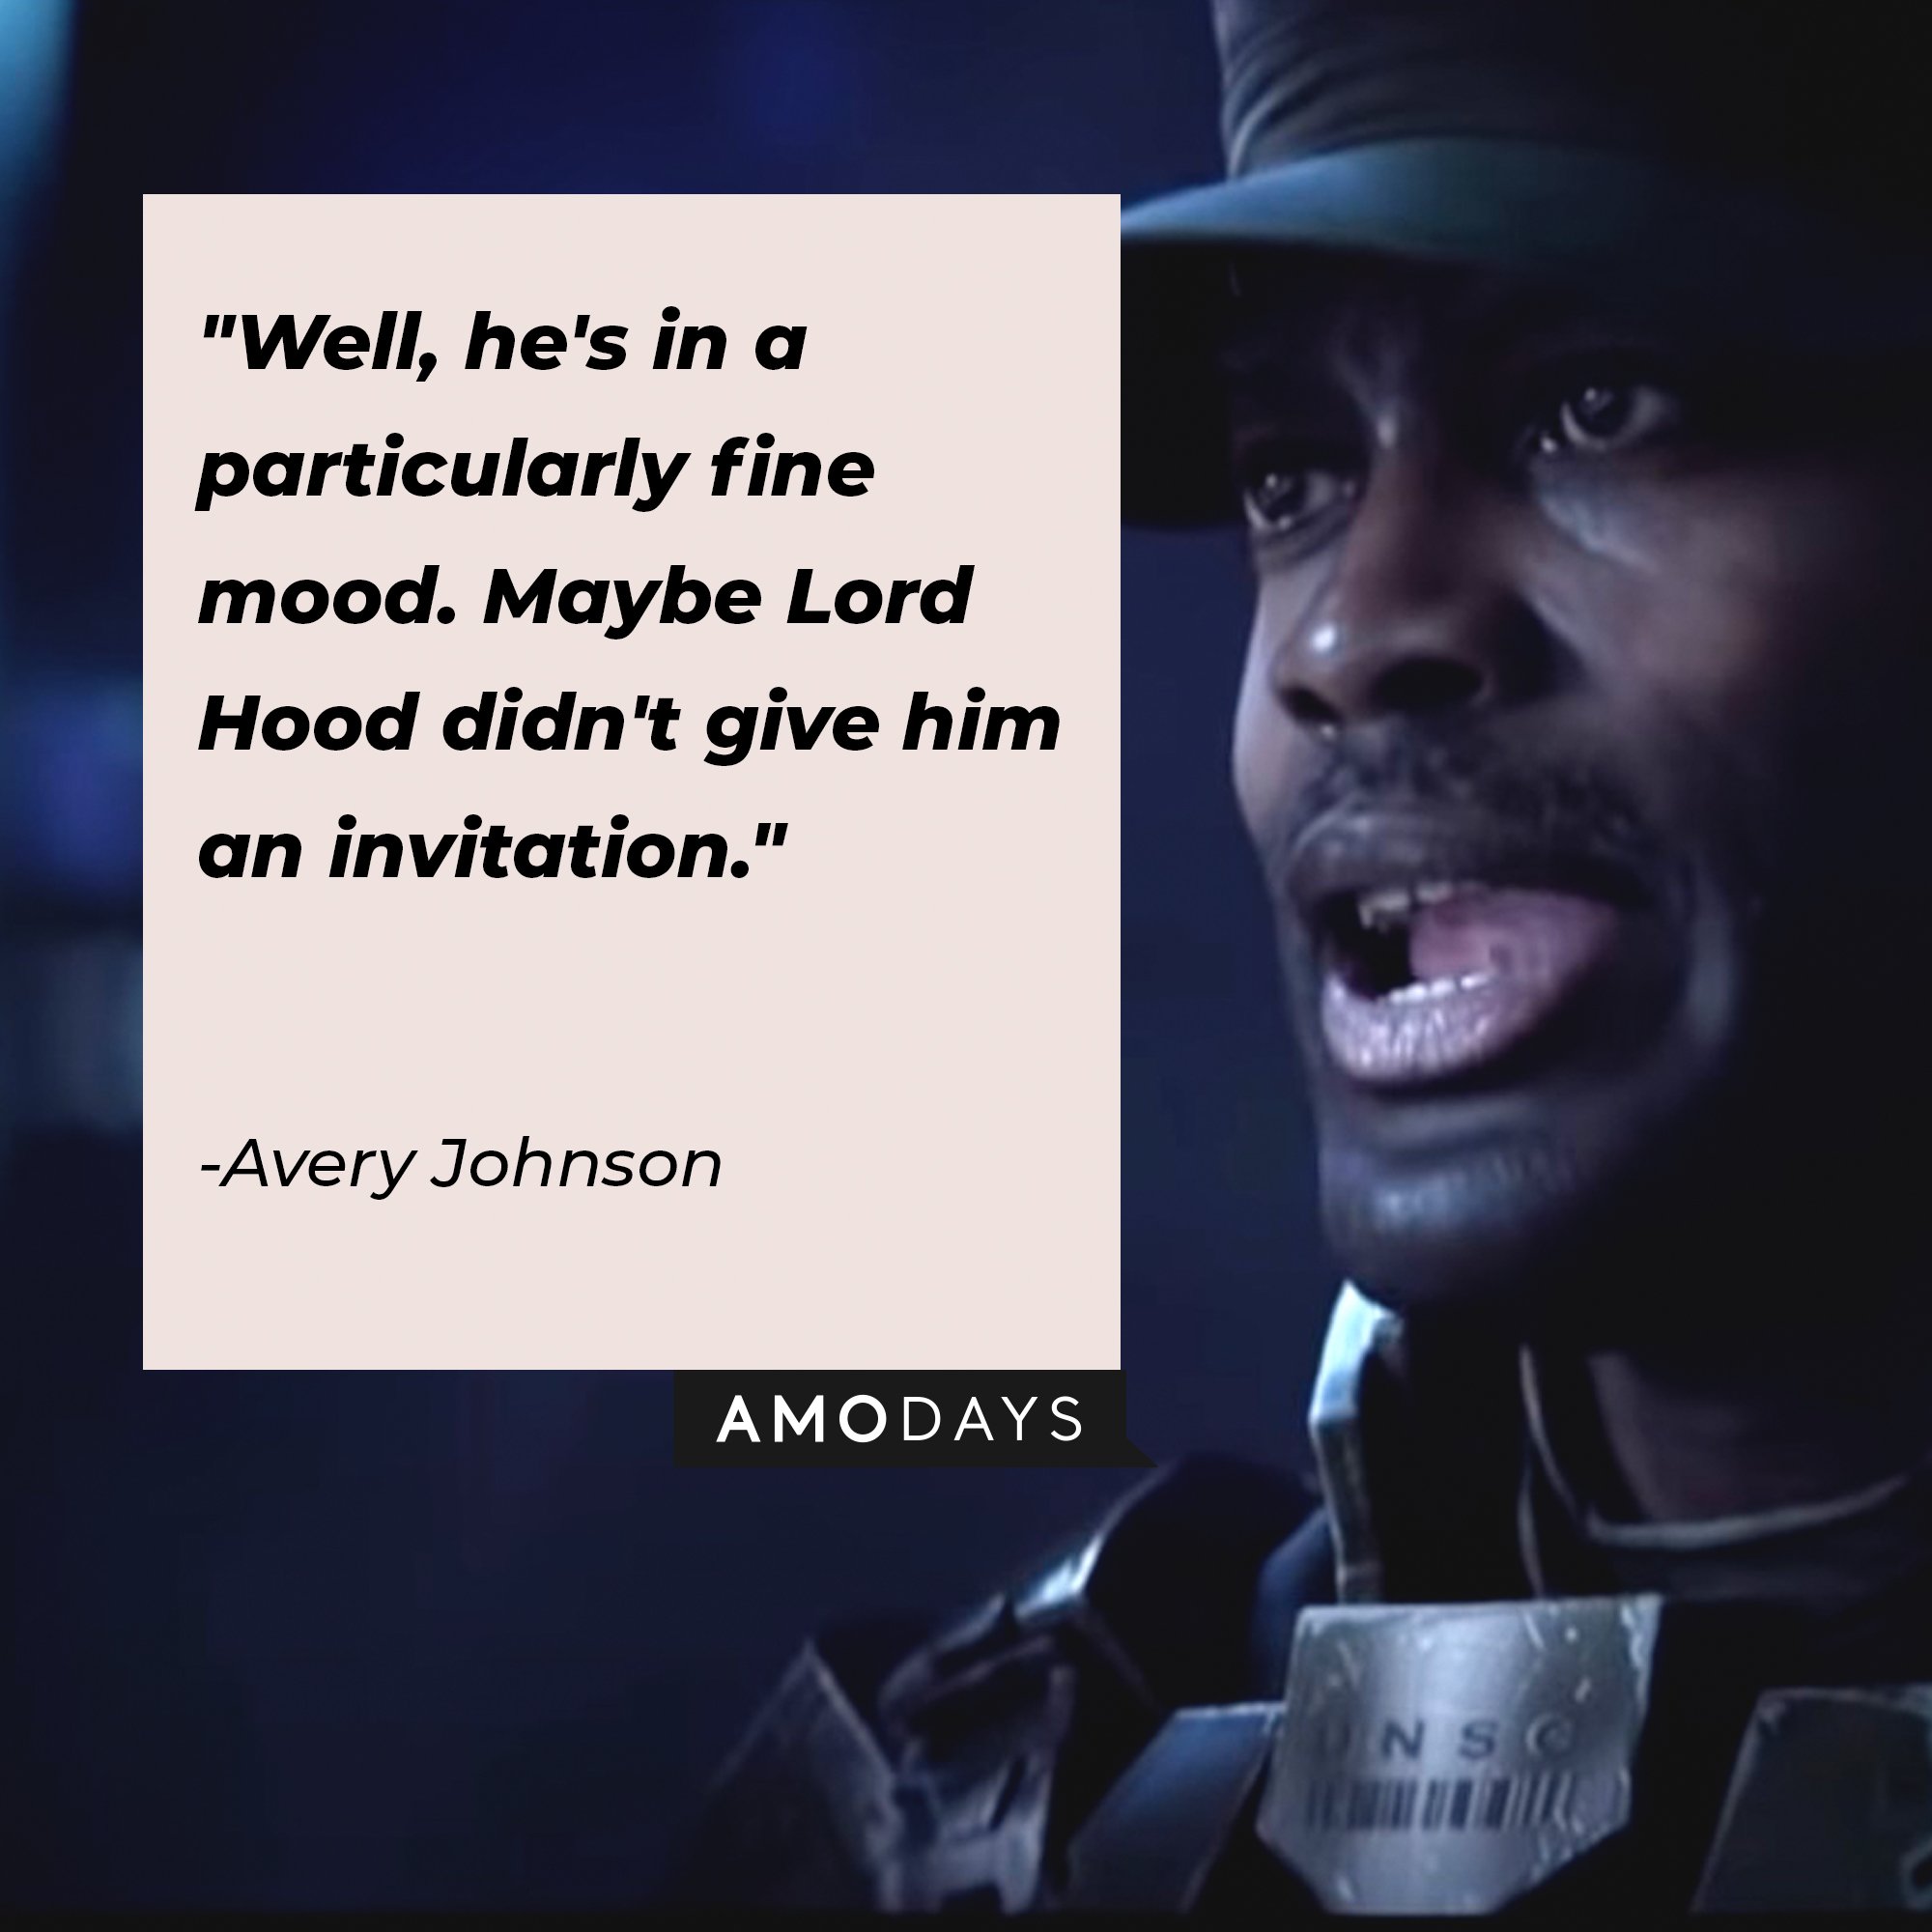 Avery Johnson's quote: "Well, he's in a particularly fine mood. Maybe Lord Hood didn't give him an invitation." | Image: AmoDays